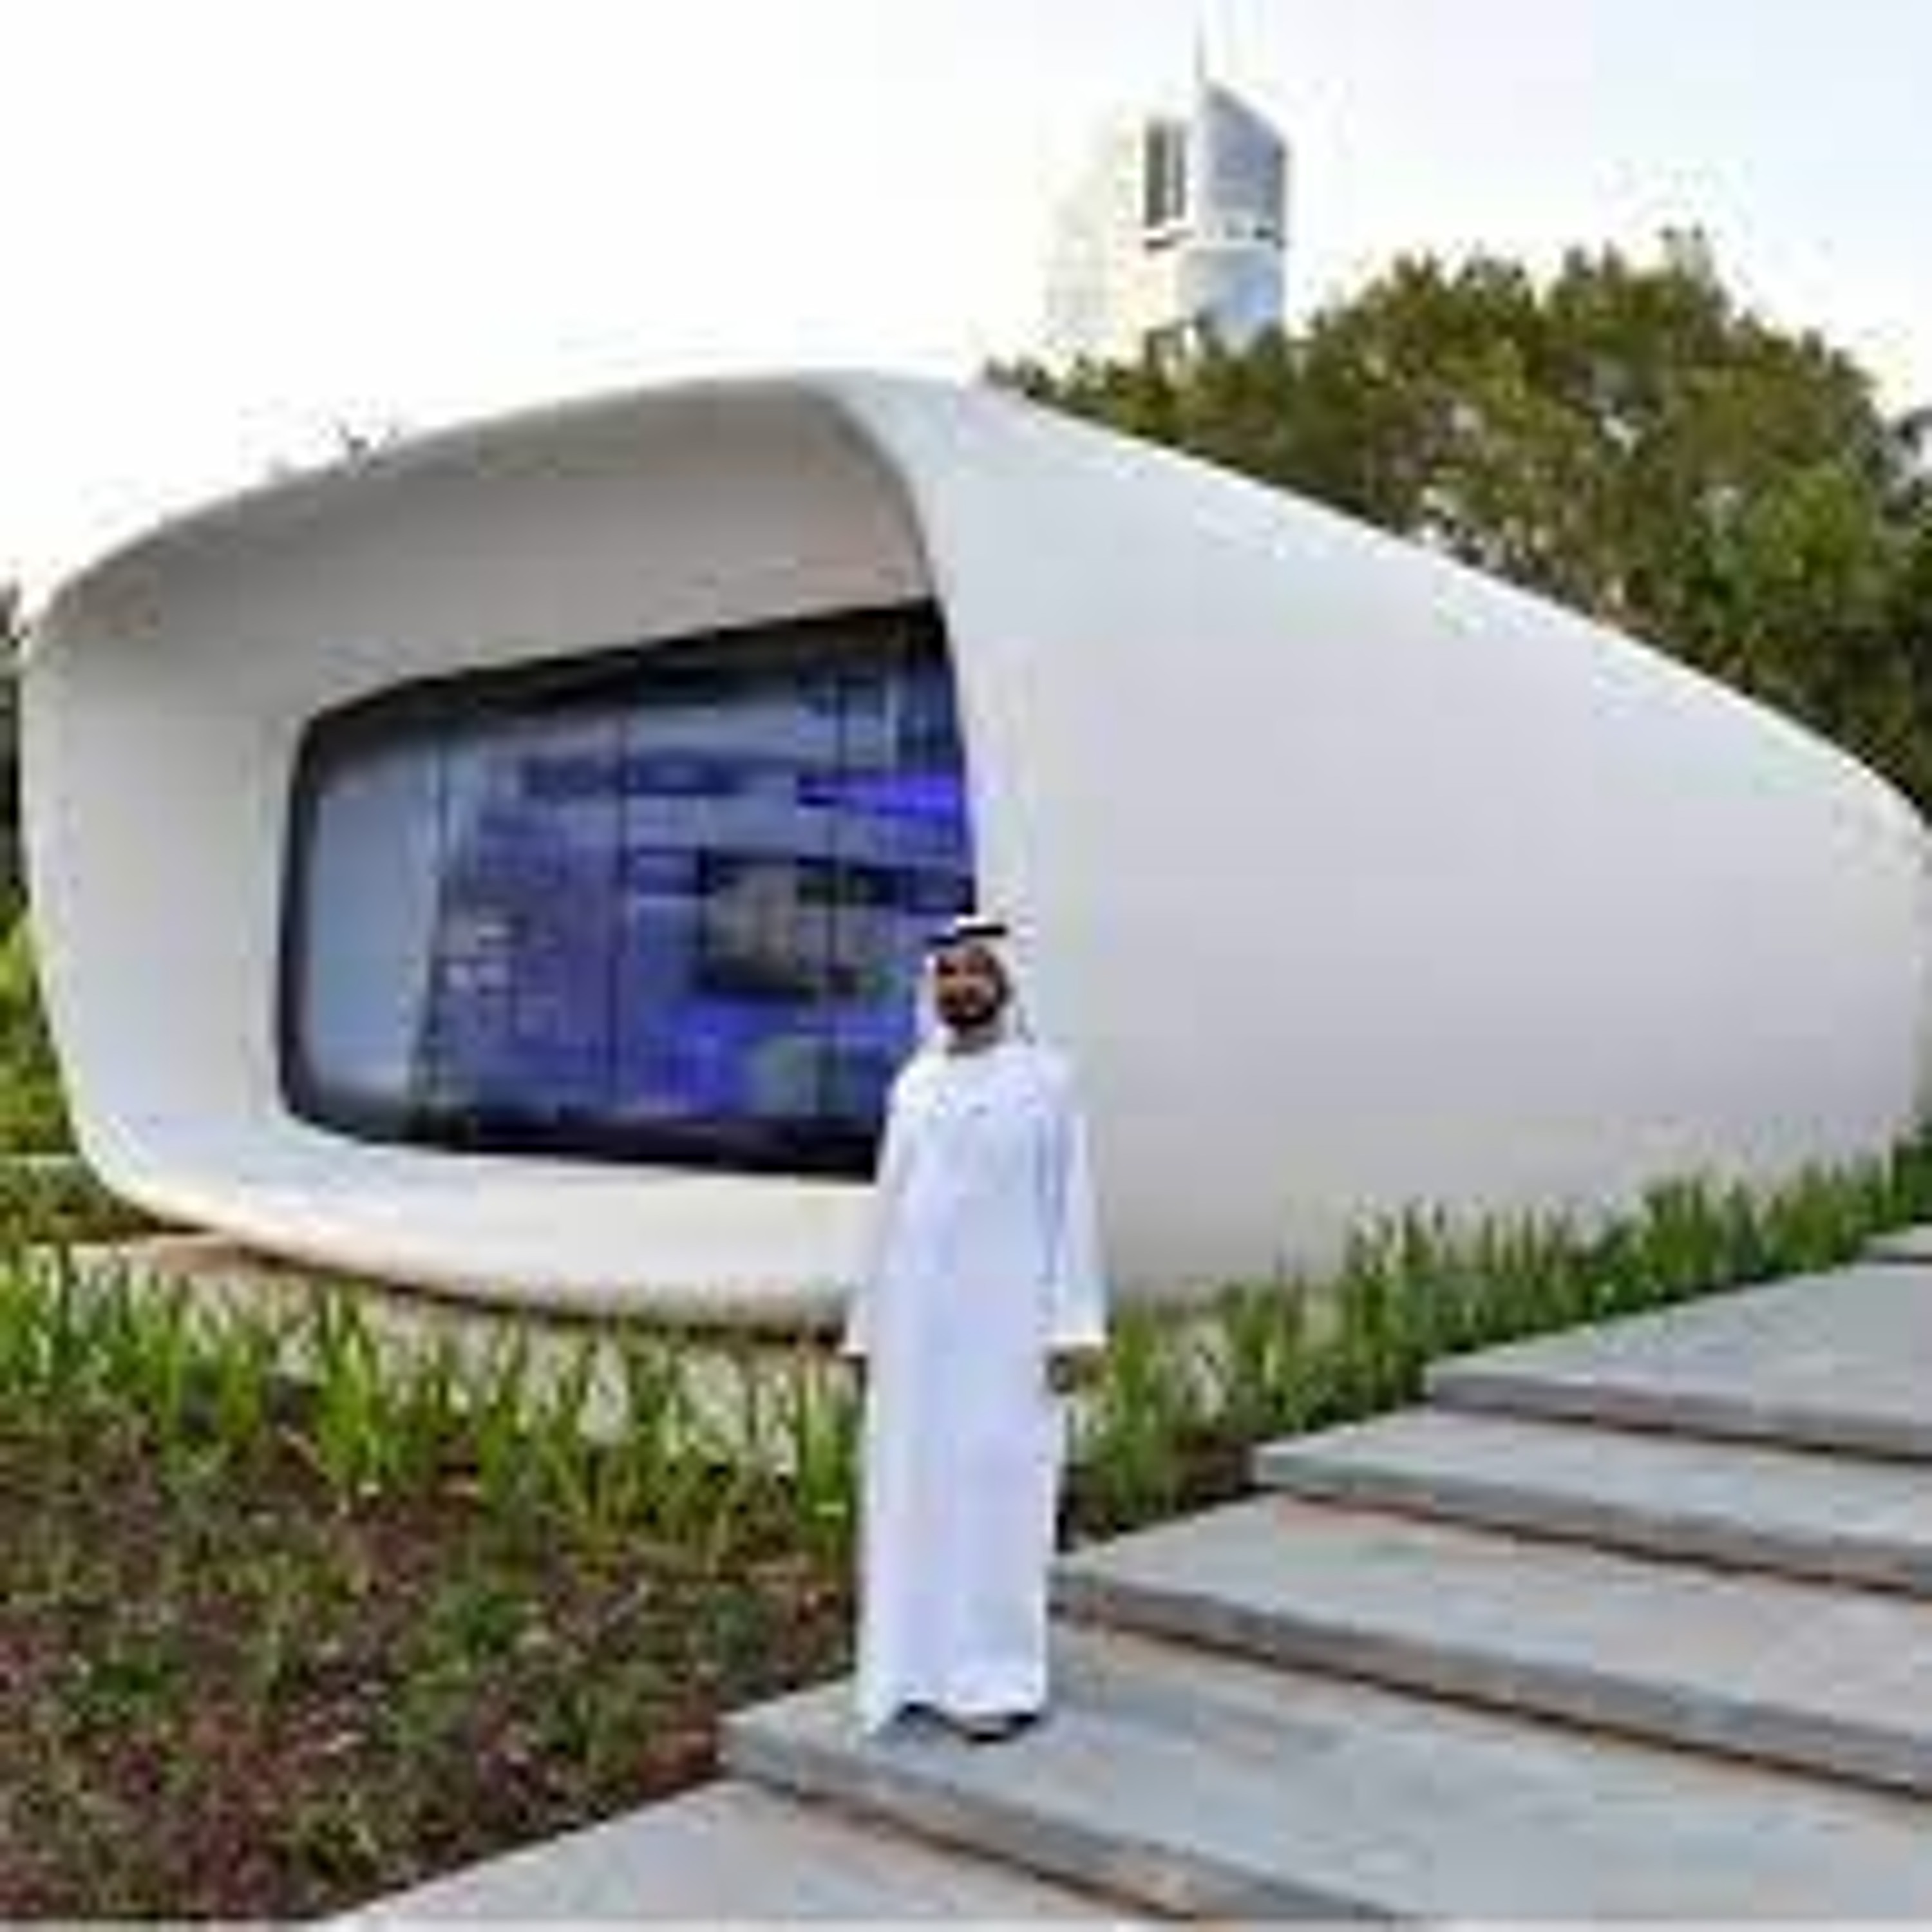 UAE First Federal Facility Using 3D Printing (11.11.21)